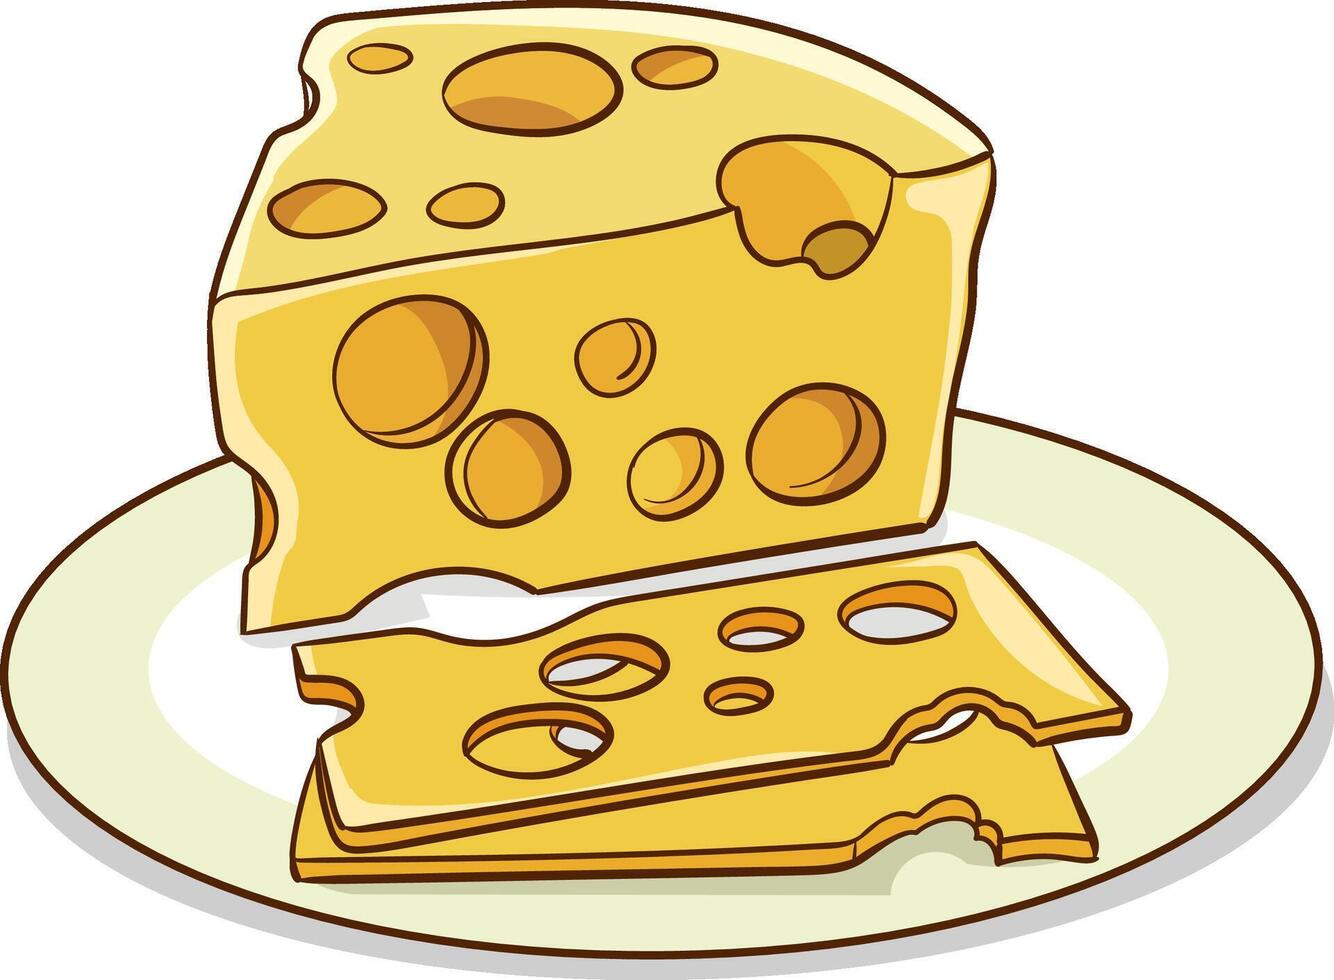 Vector illustration of a piece of cheese on a plate with cheese slices